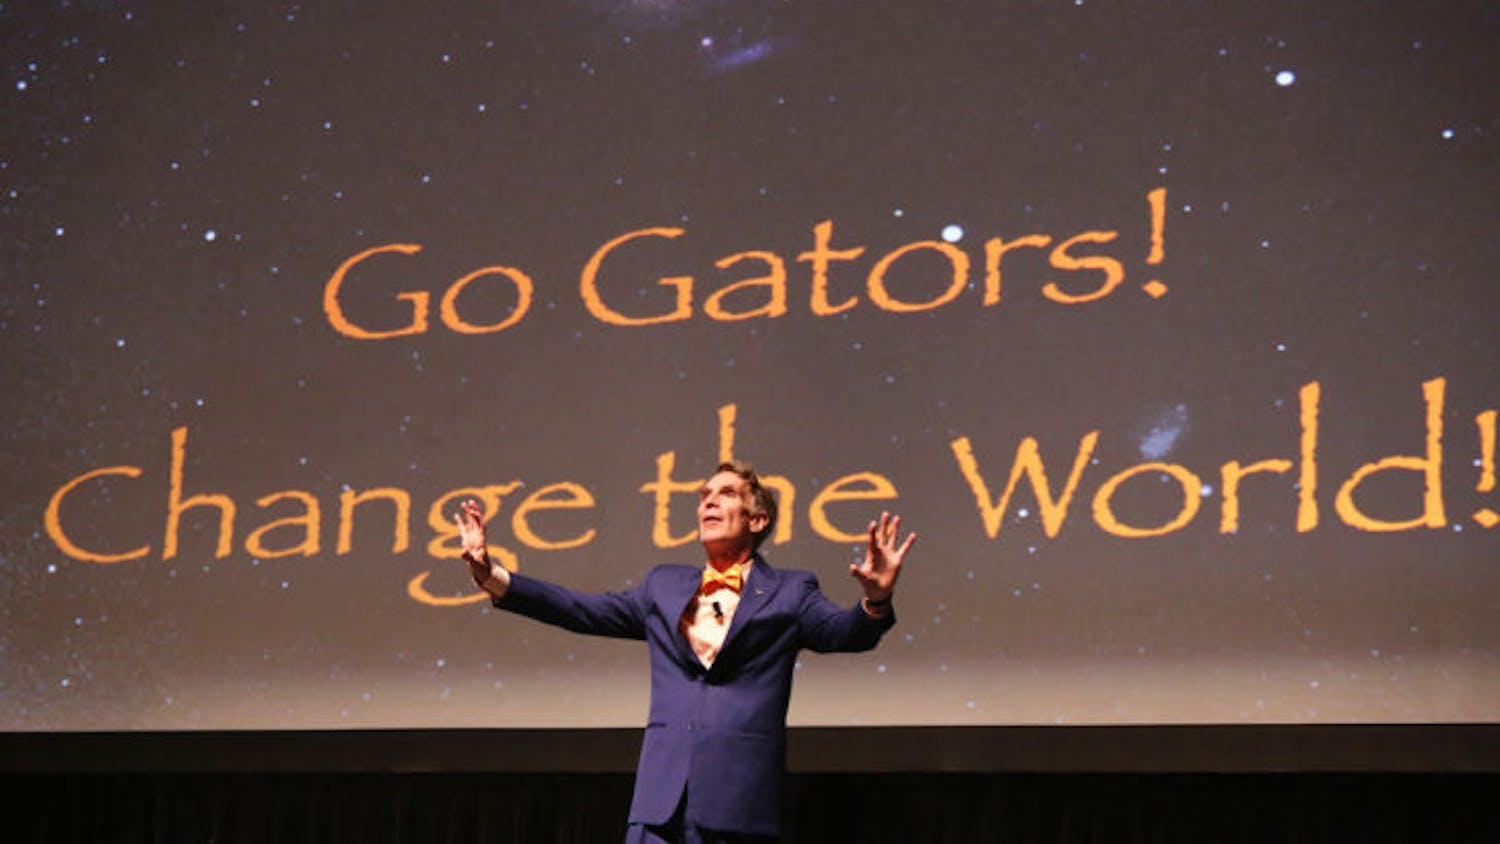 The Accent Speakers Bureau hosted Bill Nye at the Phillips Center for the Performing Arts in 2013. Nye spoke to a full house about sundials and outer space.